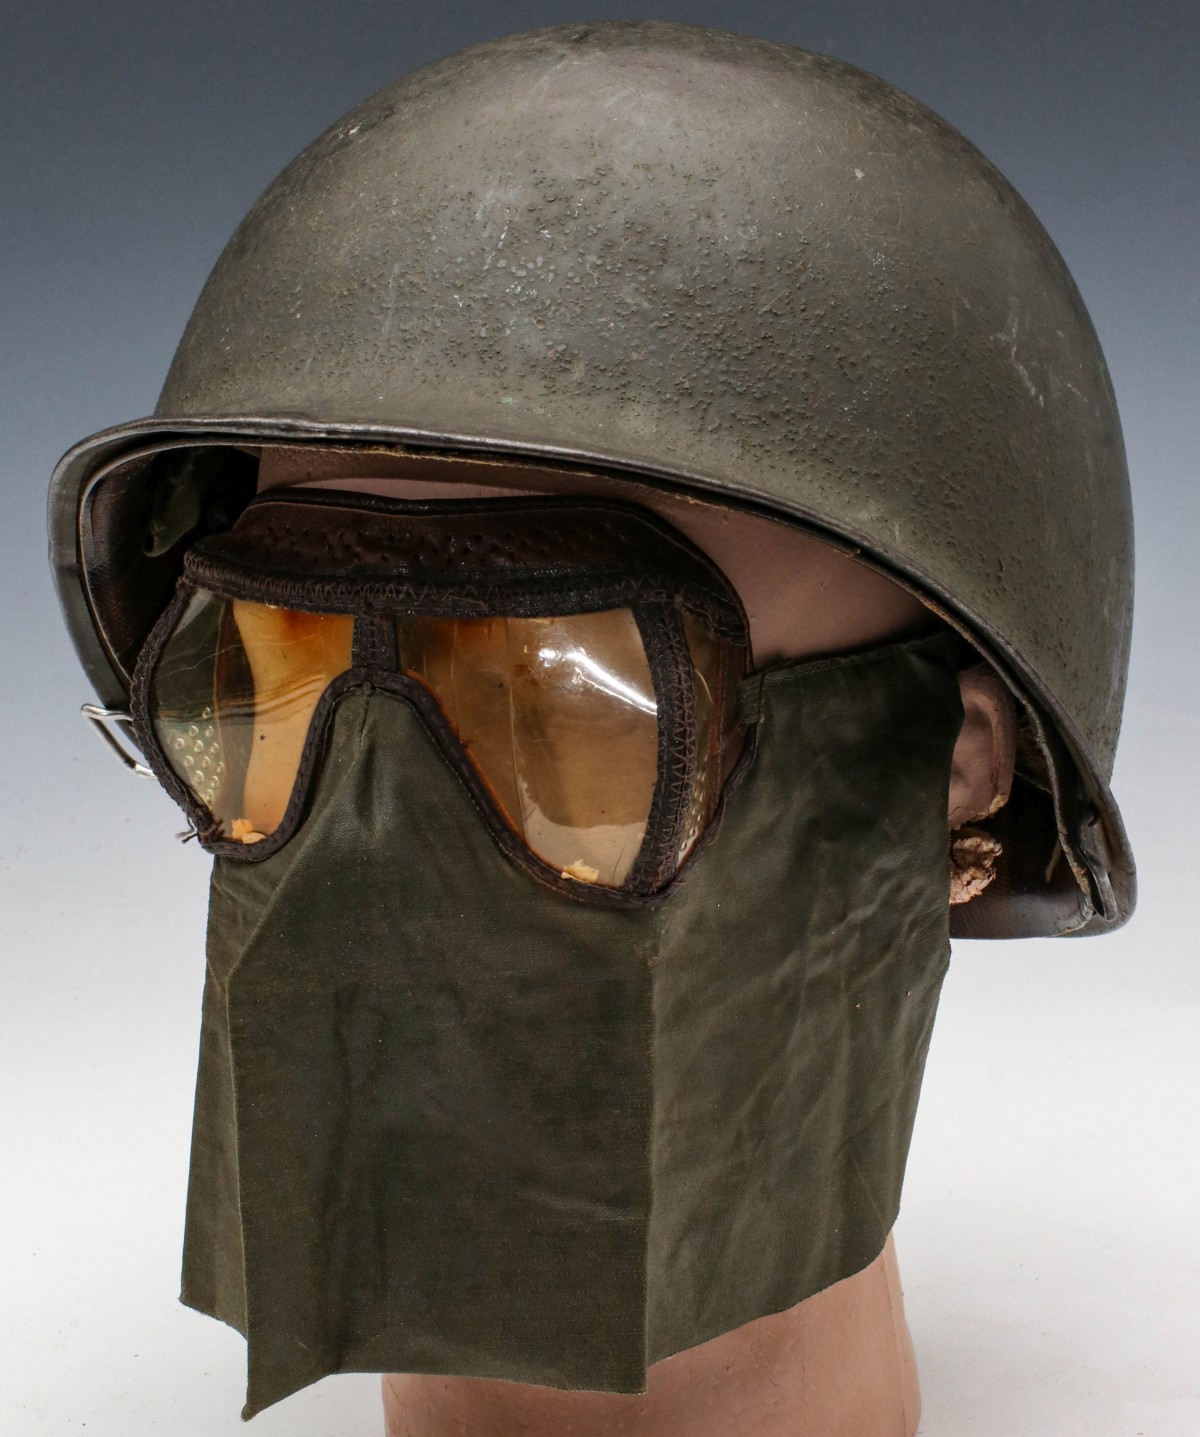 A WWII BALE HELMET WITH FACE MASK